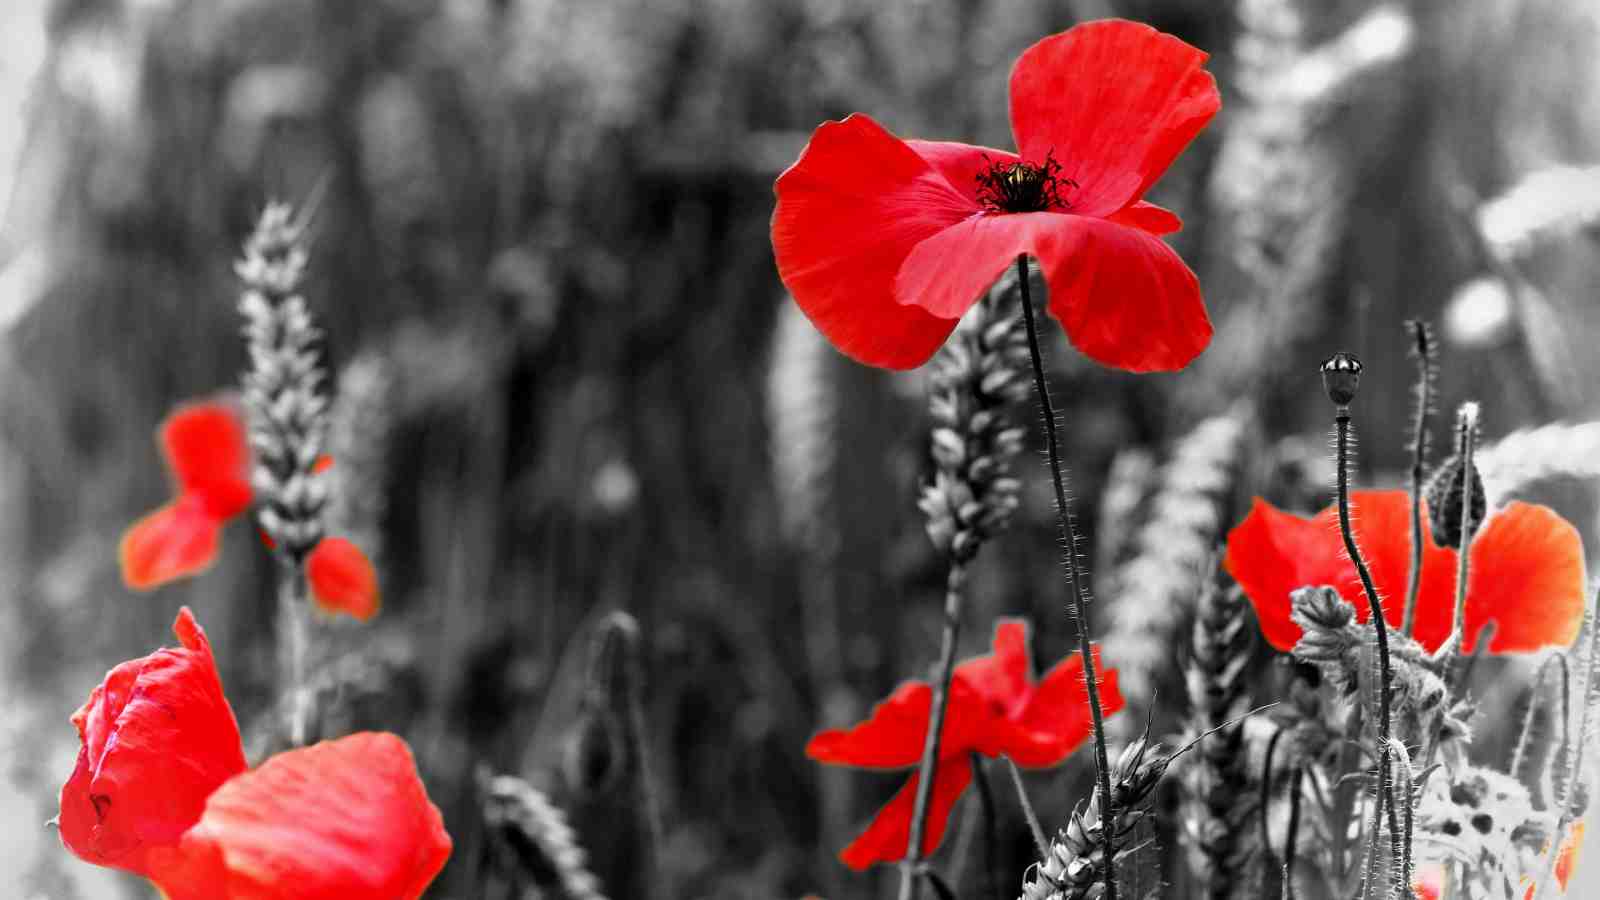 Red poppies on a black and white background